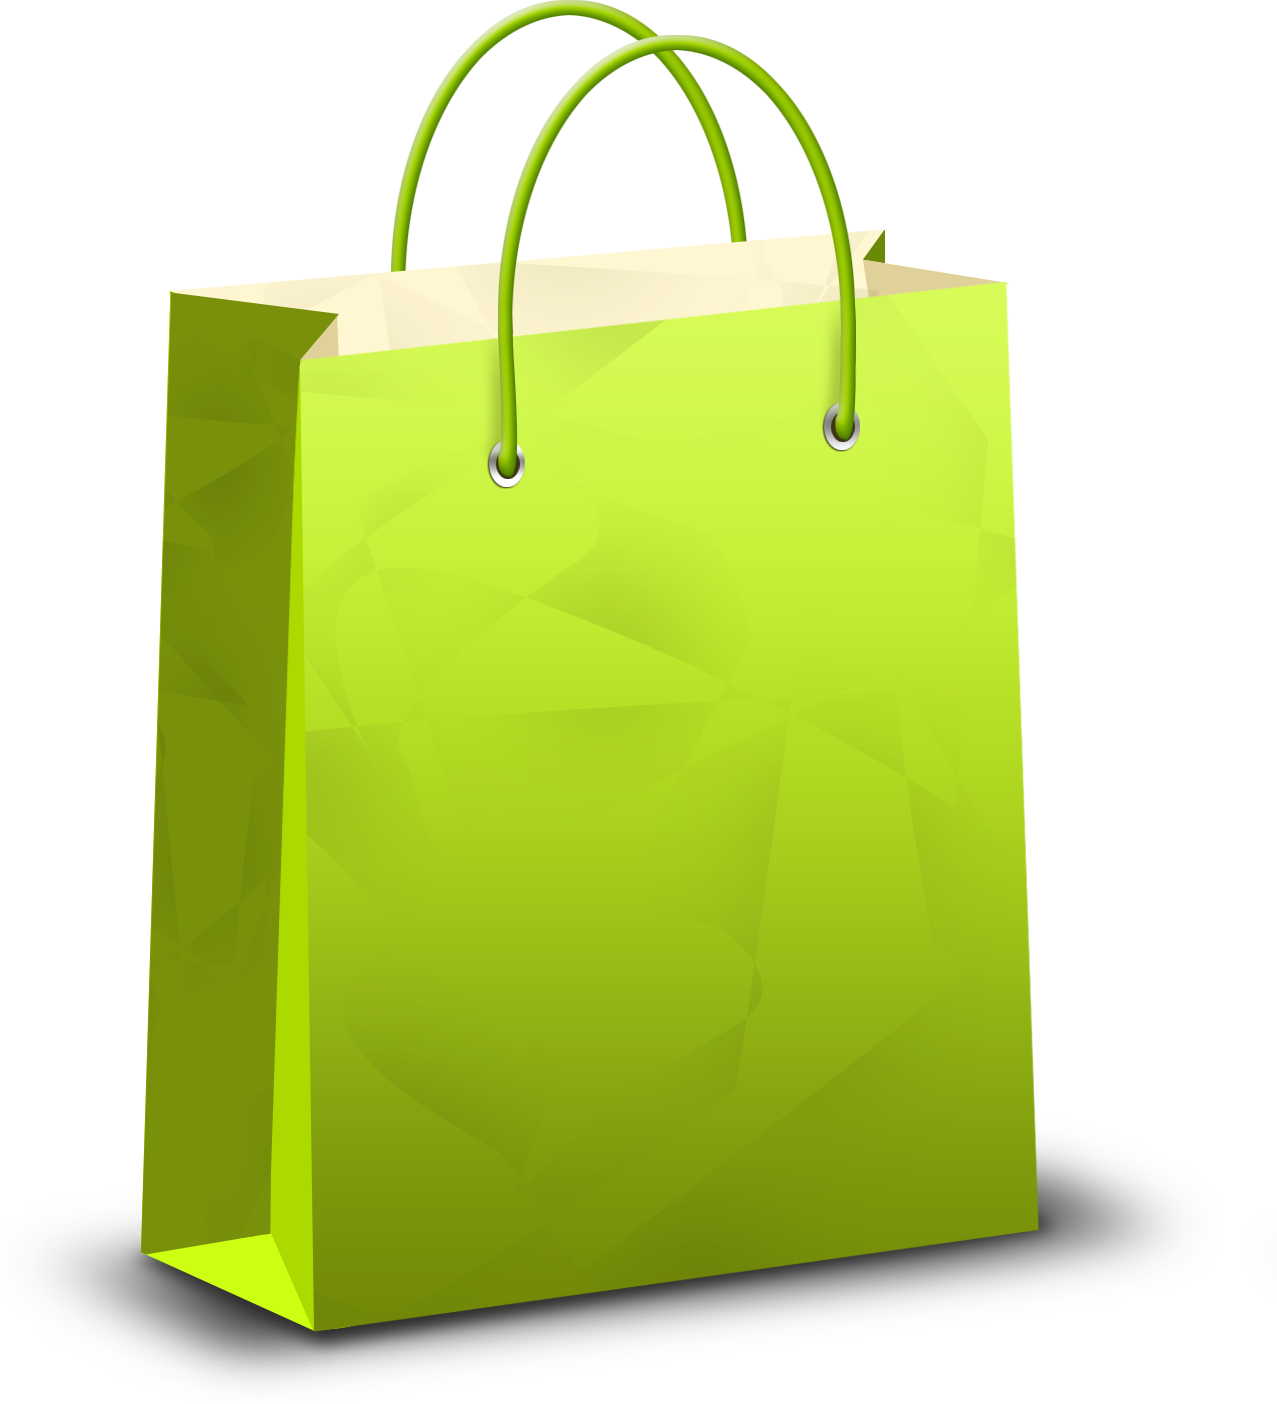 Grocery clipart reusable bag. Shopping png image 